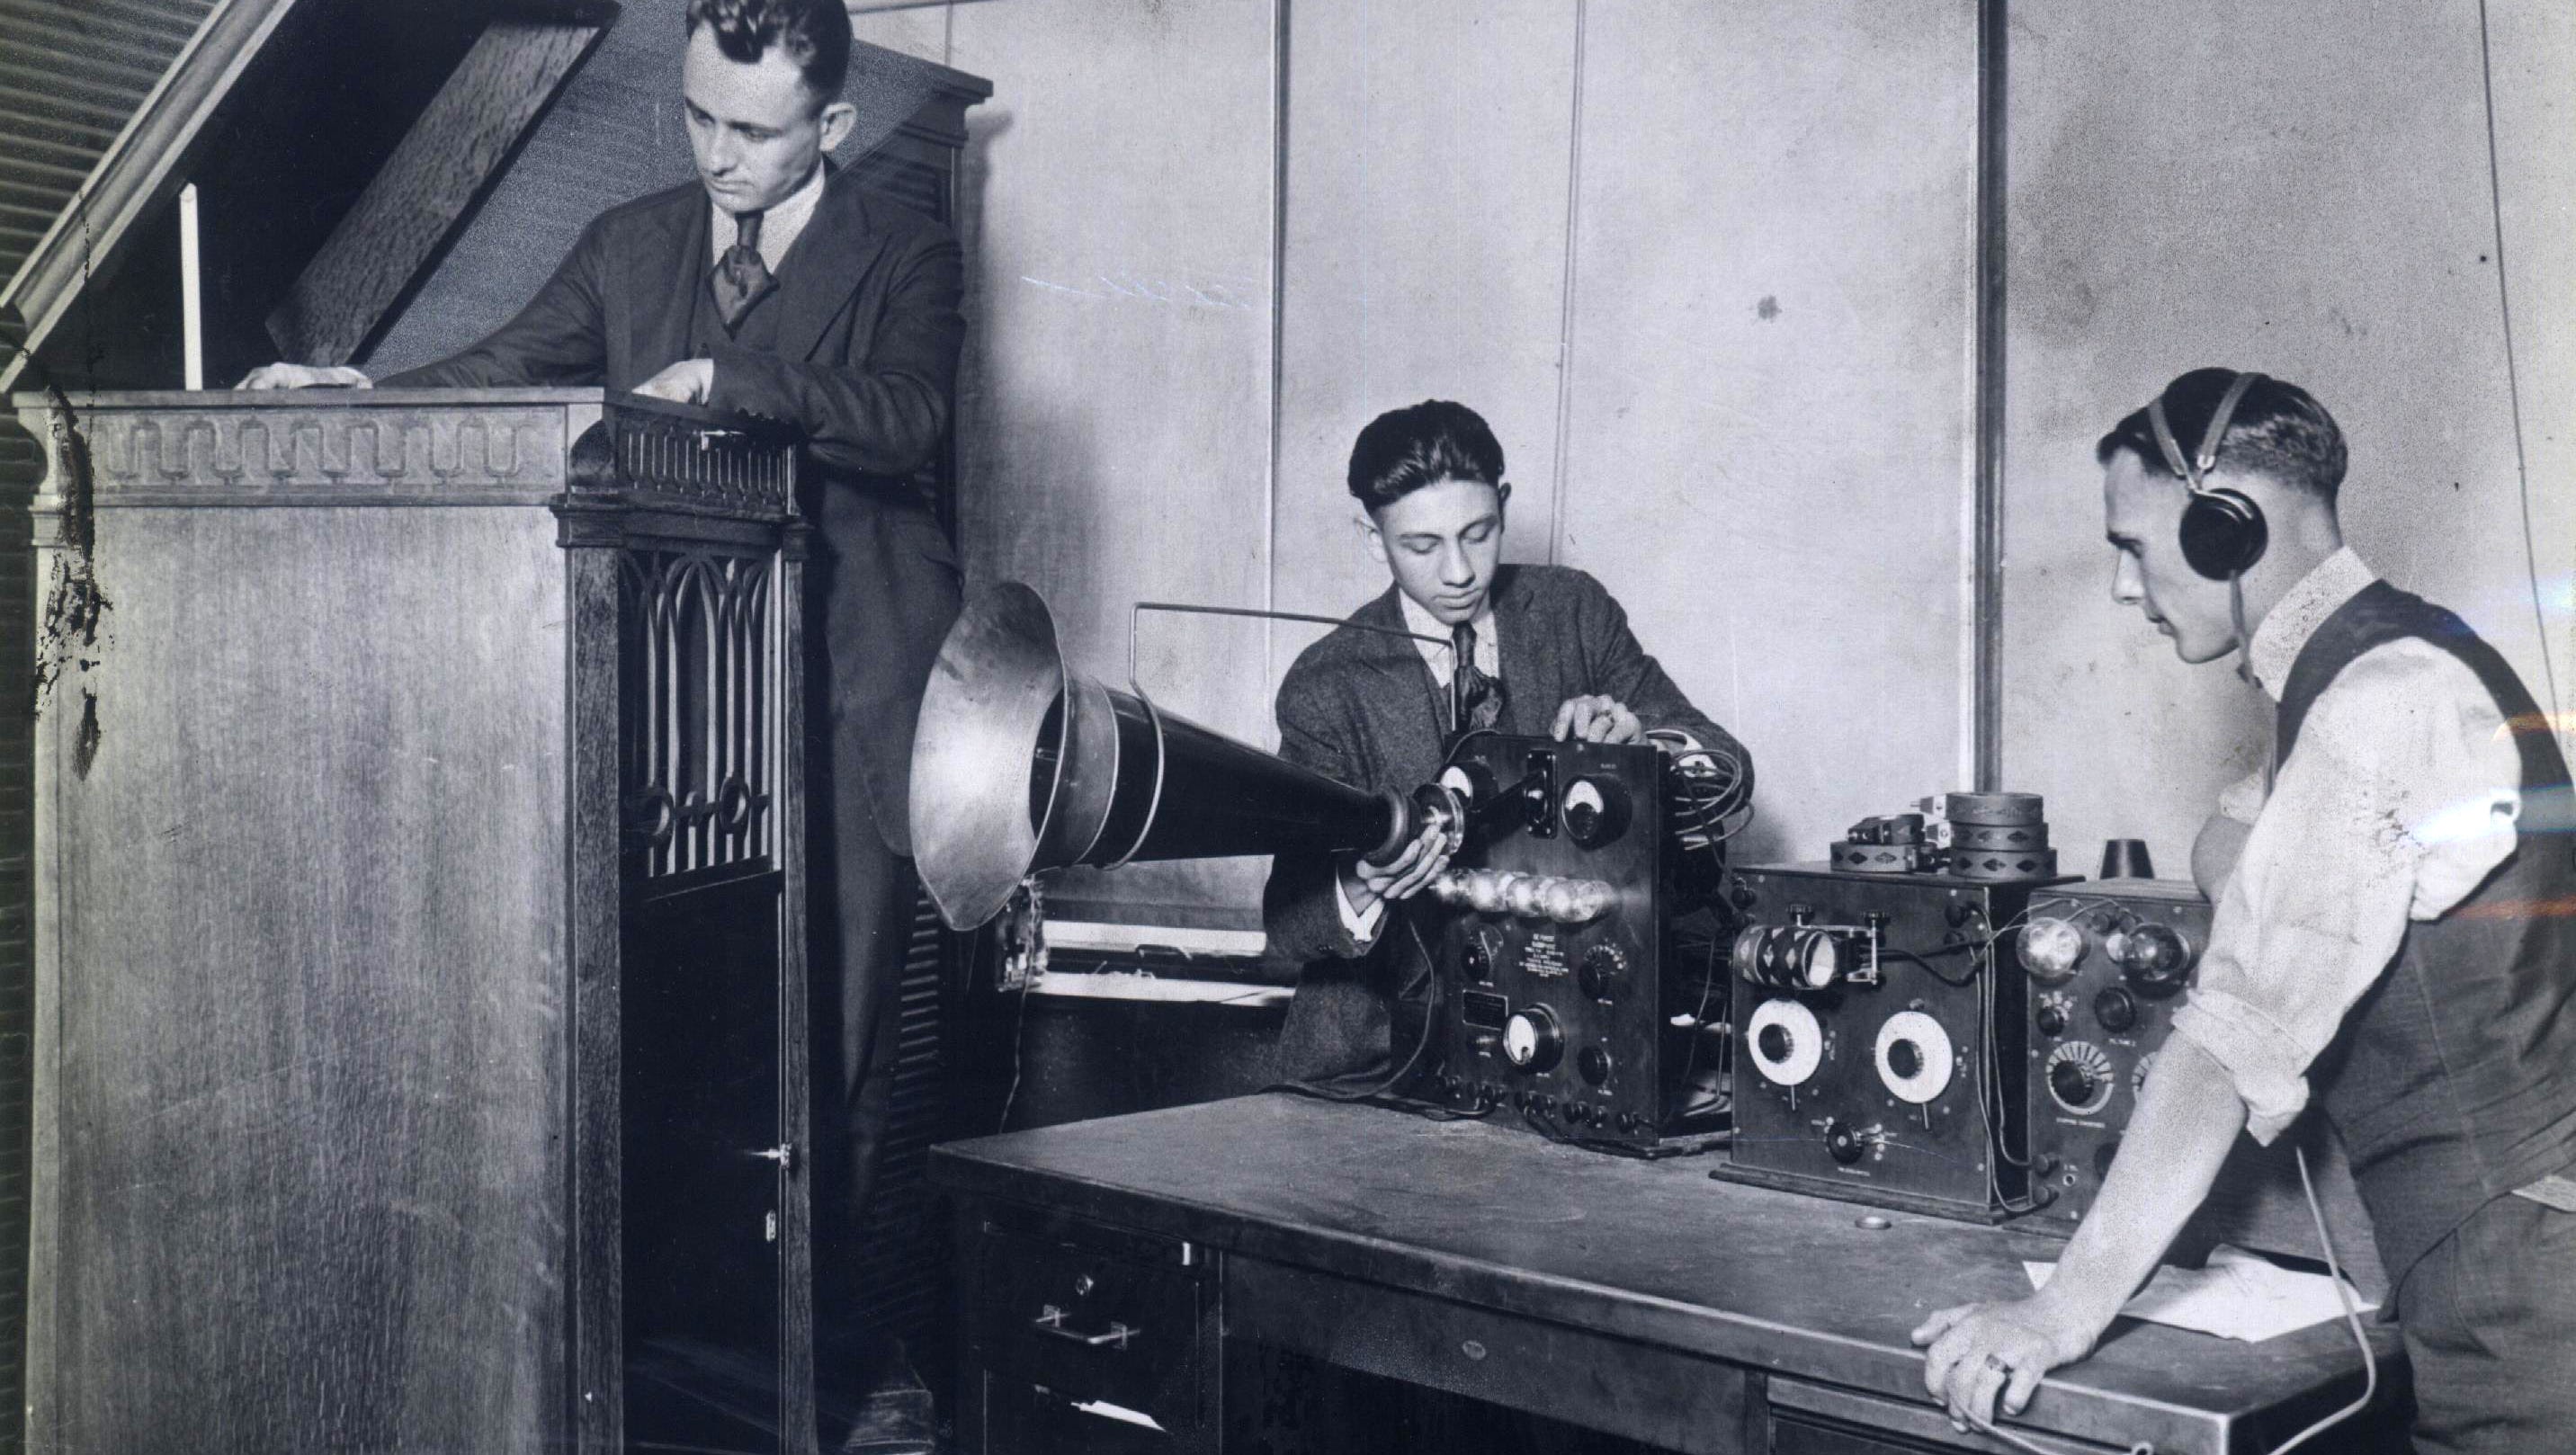 This photo made a short time after Aug. 20, 1920 approximates the scene that night in The Detroit News' makeshift studio, when station 8MK went on the air for the first time. From left are Howard Trumbo, a record shop manager who took part in the event; Detroit News office boy Elton Plant; and radio engineer Frank Edwards.  Plant was drafted as the announcer because he had a good speaking and singing voice.